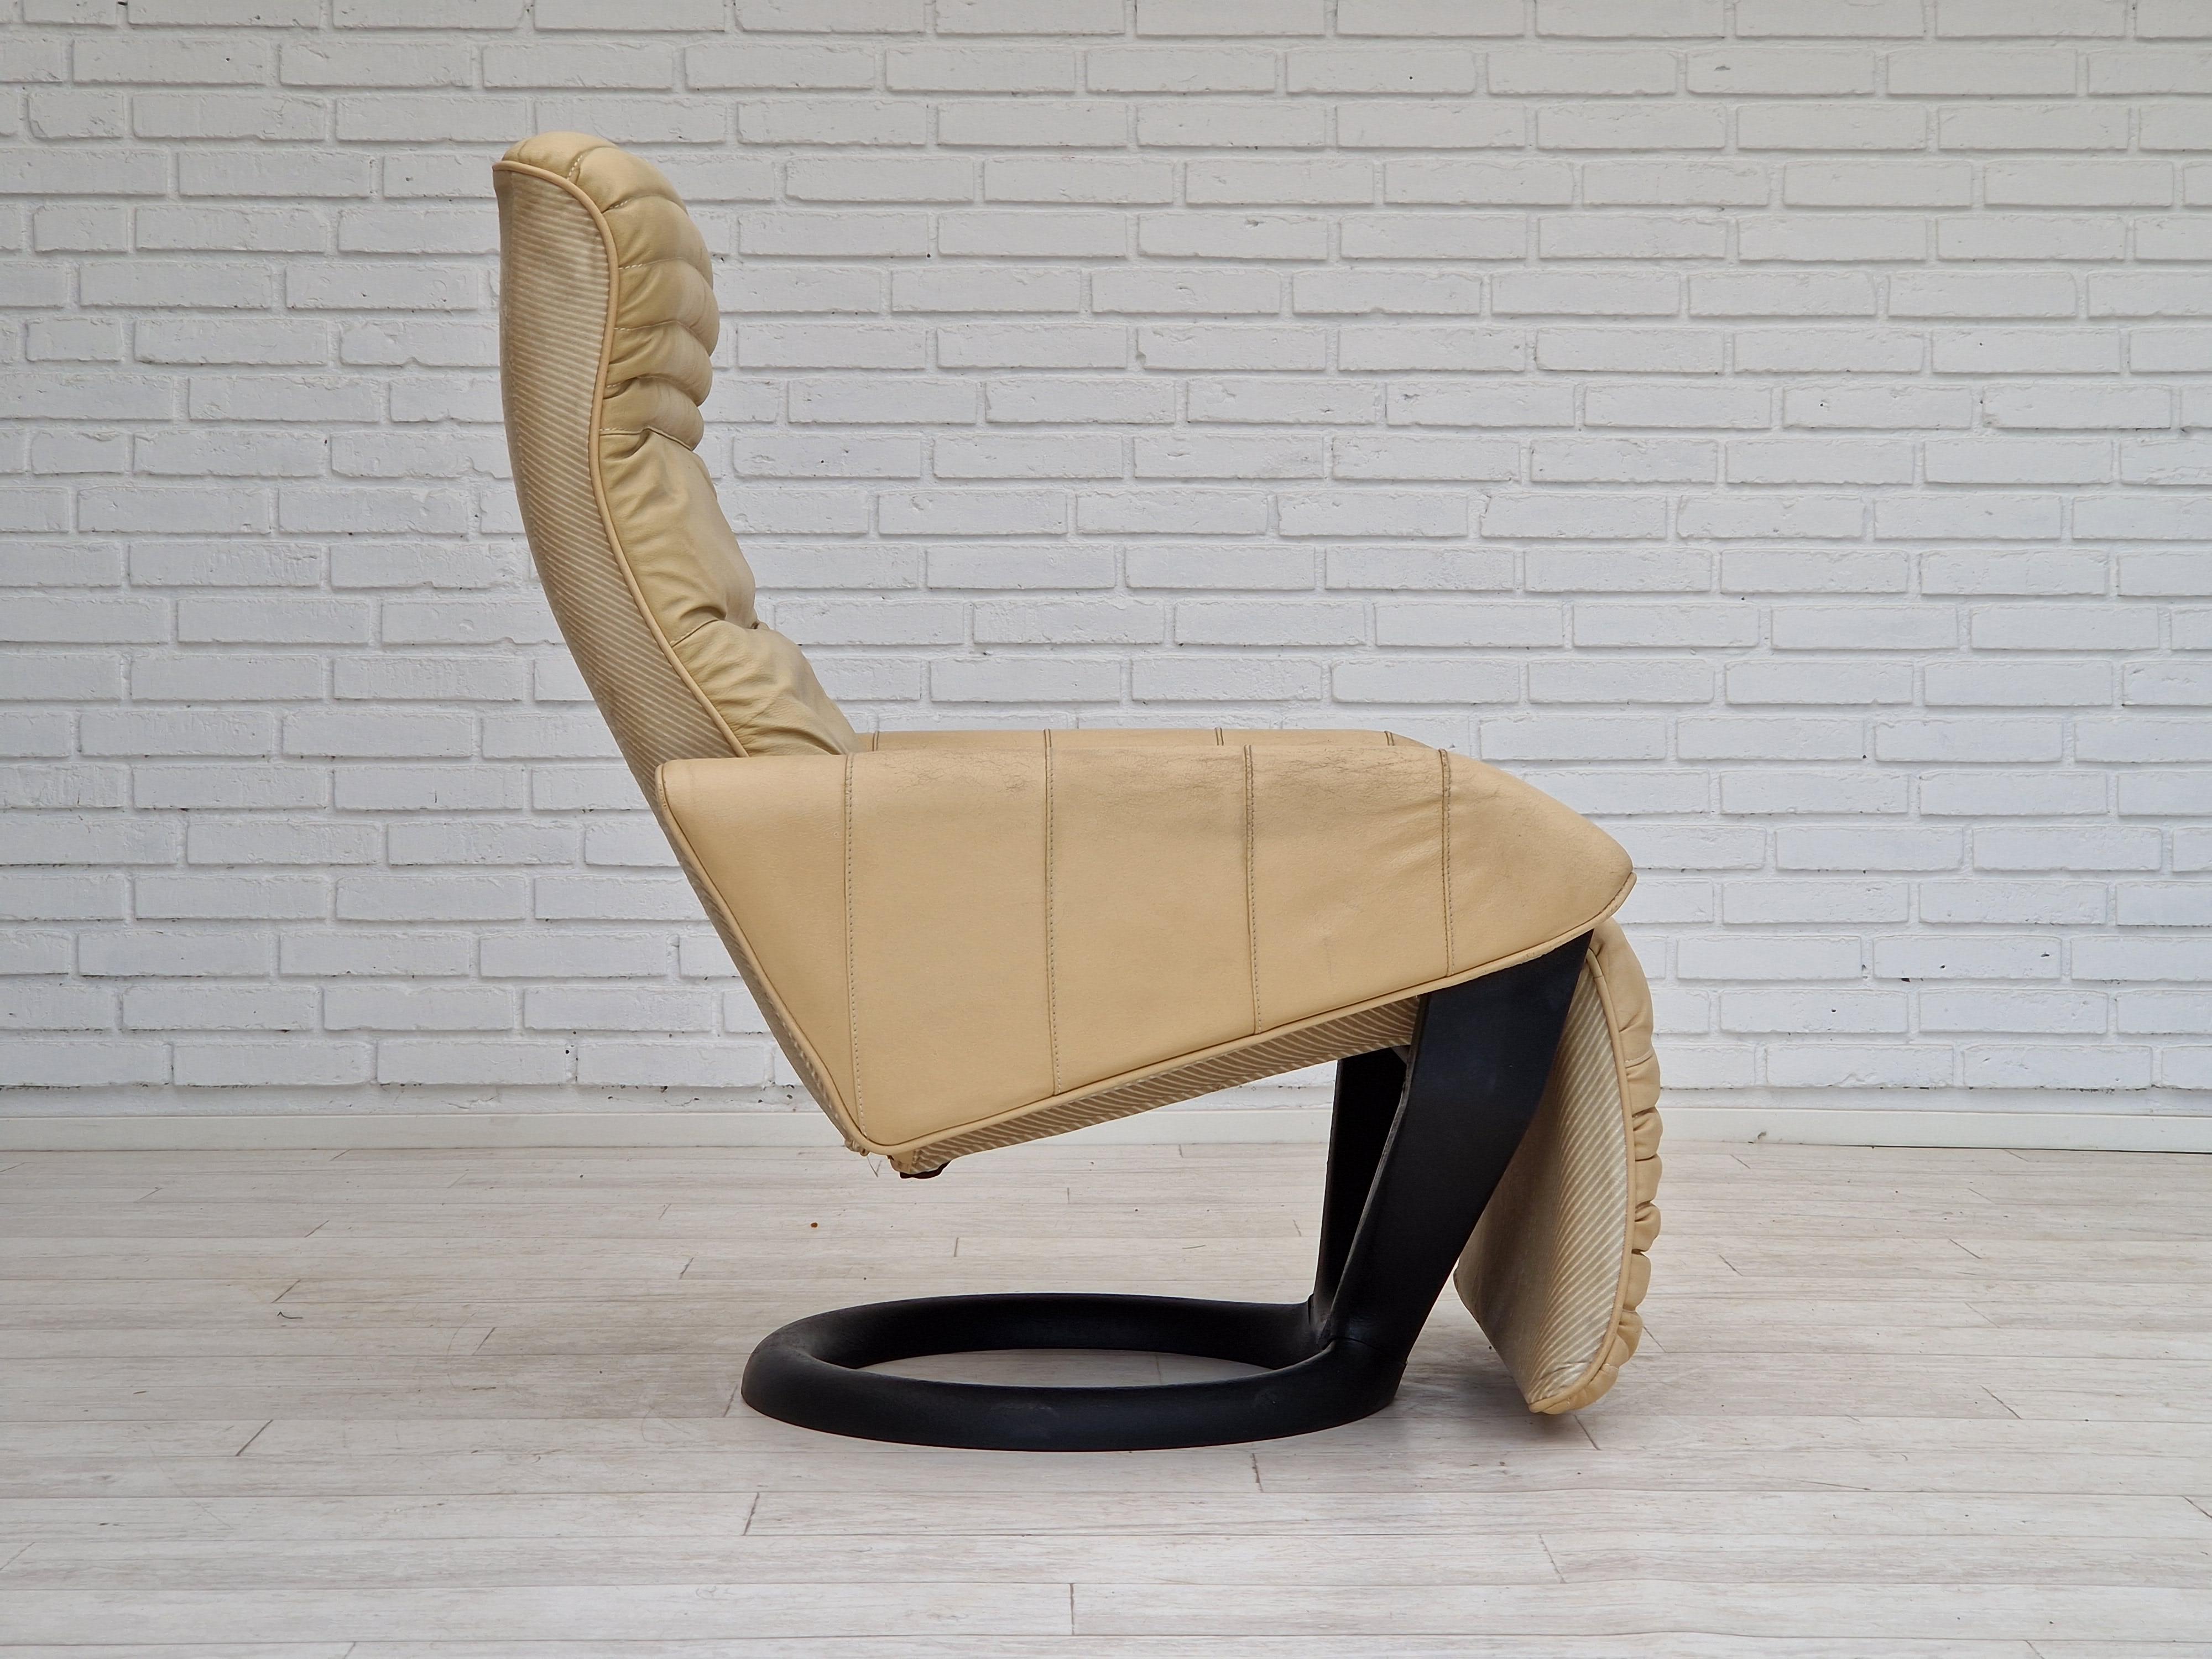 Late 20th Century 1980s, Danish design by Steen Ostergård for Bramin Møbler. 